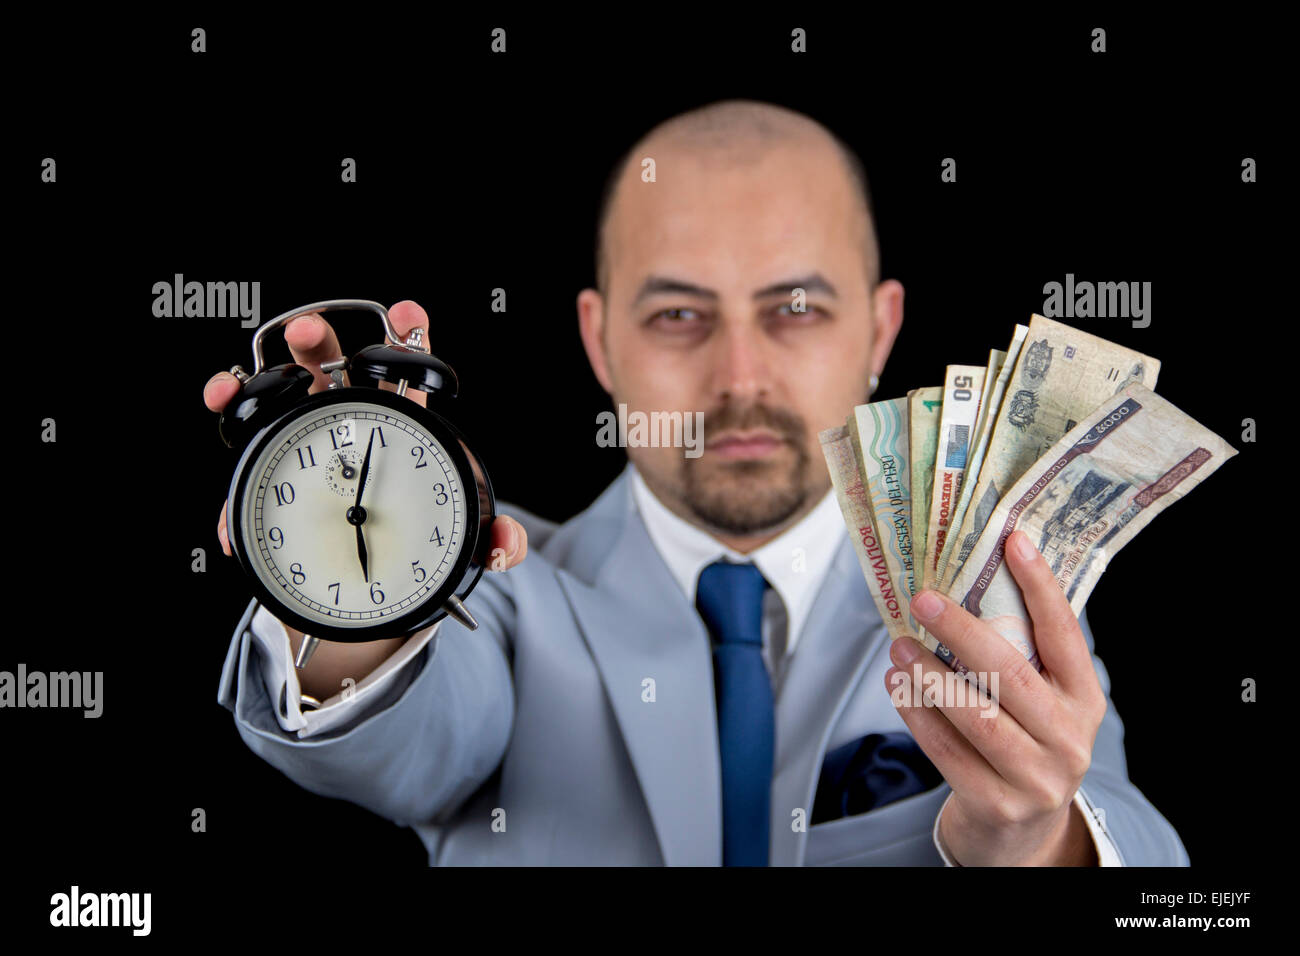 man holding money and alarm wearing a business suit, race against the clock, deadline Stock Photo